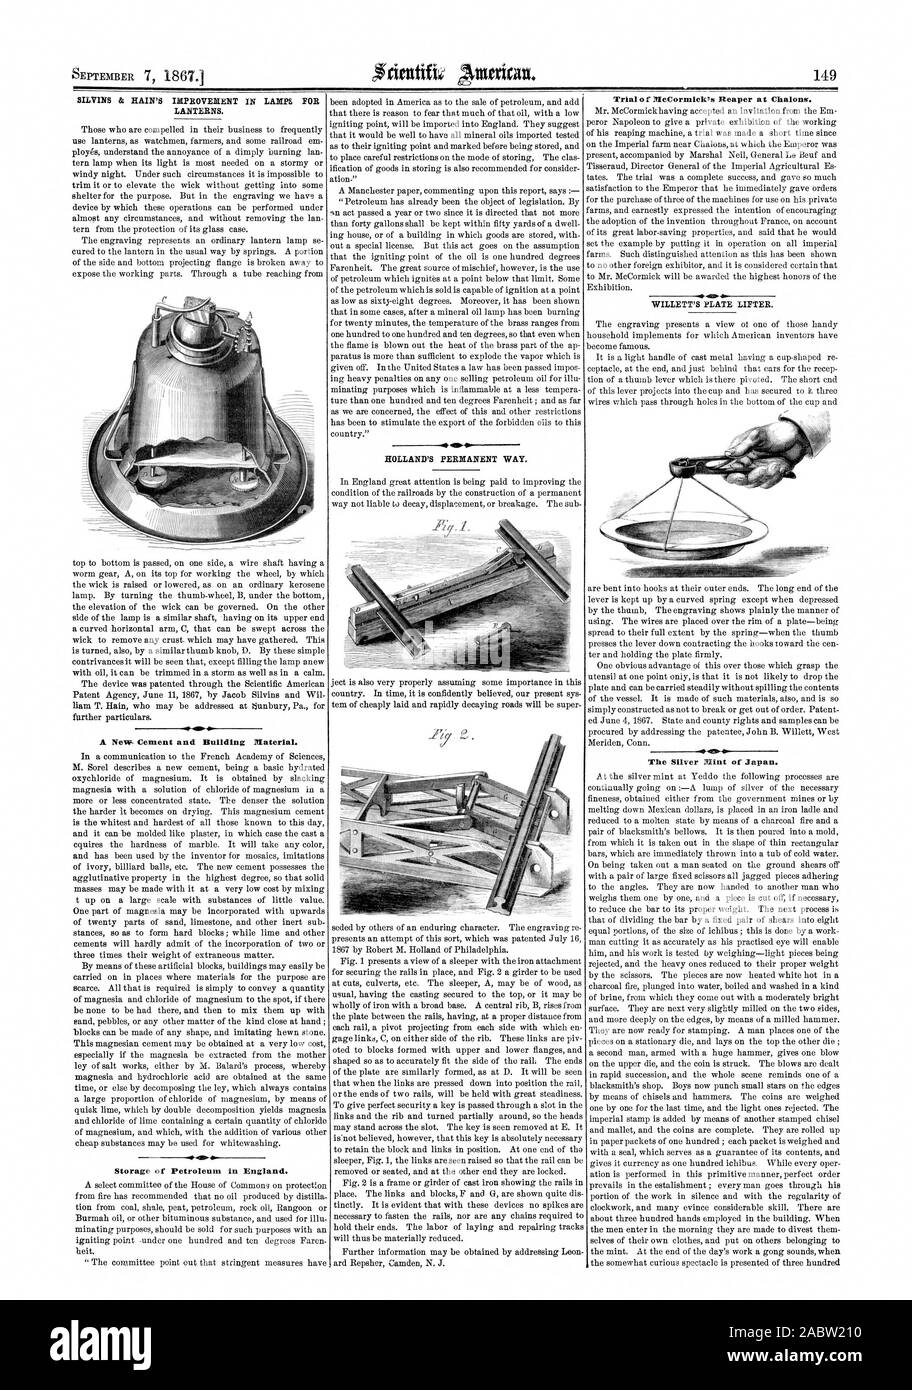 SILVINS & RAIN'S IMPROVEMENT IN LAMPS FOR LANTERNS. A New- Cement and Building Material. 40 Storage of Petroleum in England. HOLLAND'S PERMANENT WAY. Trial of McCormick's Reaper at Chalons. WILLETT'S PLATE LIFTER. The Silver Mint of Japan., scientific american, 1867-09-07 Stock Photo